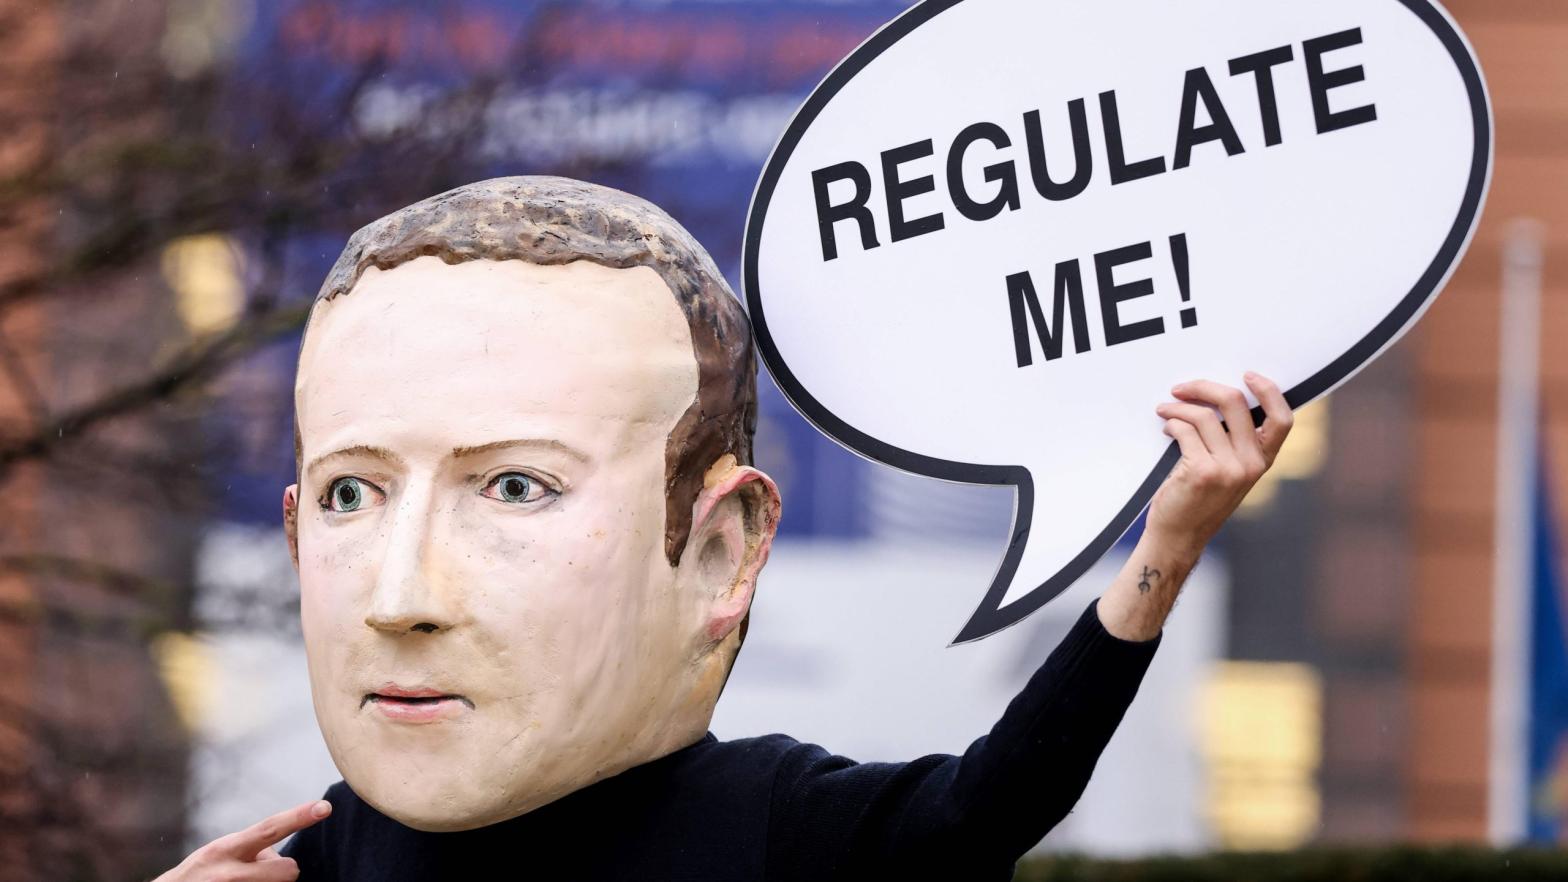 An activist wears a mask depicting Mark Zuckerberg outside the European Commission building in December. (Photo: Kenzo Tribouillard, Getty Images)